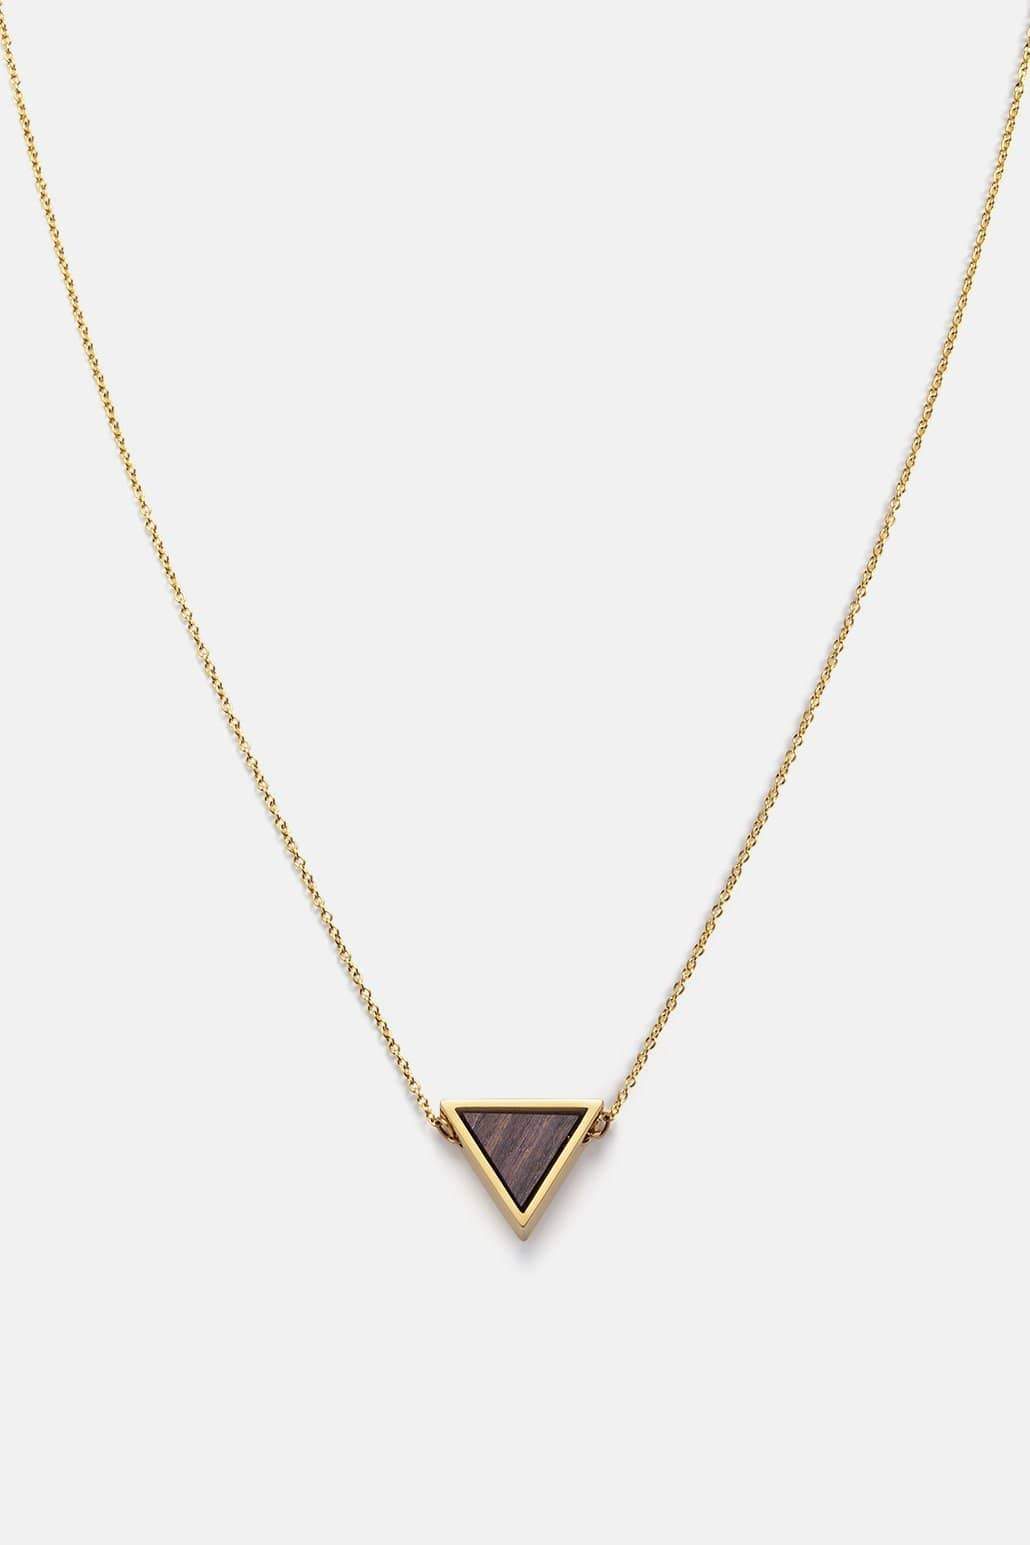 Buy Triangle Gold Plated Choker Chain Pendant Necklace Jewellery for Women  Girls Online In India At Discounted Prices